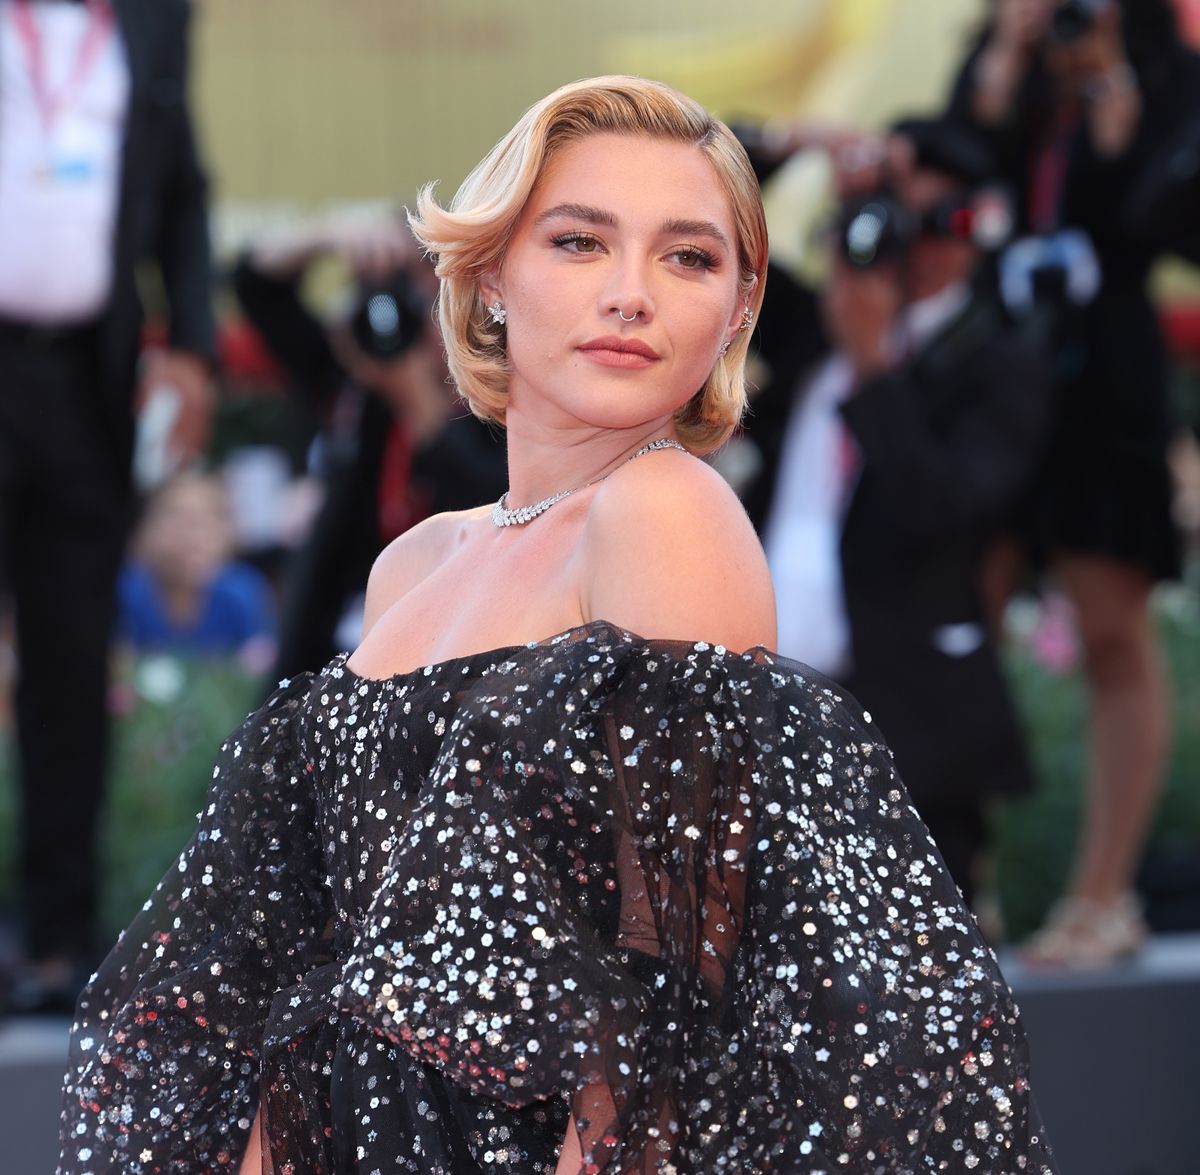 Florence Pugh Says Her 'Don't Worry Darling' Lead Role Was 